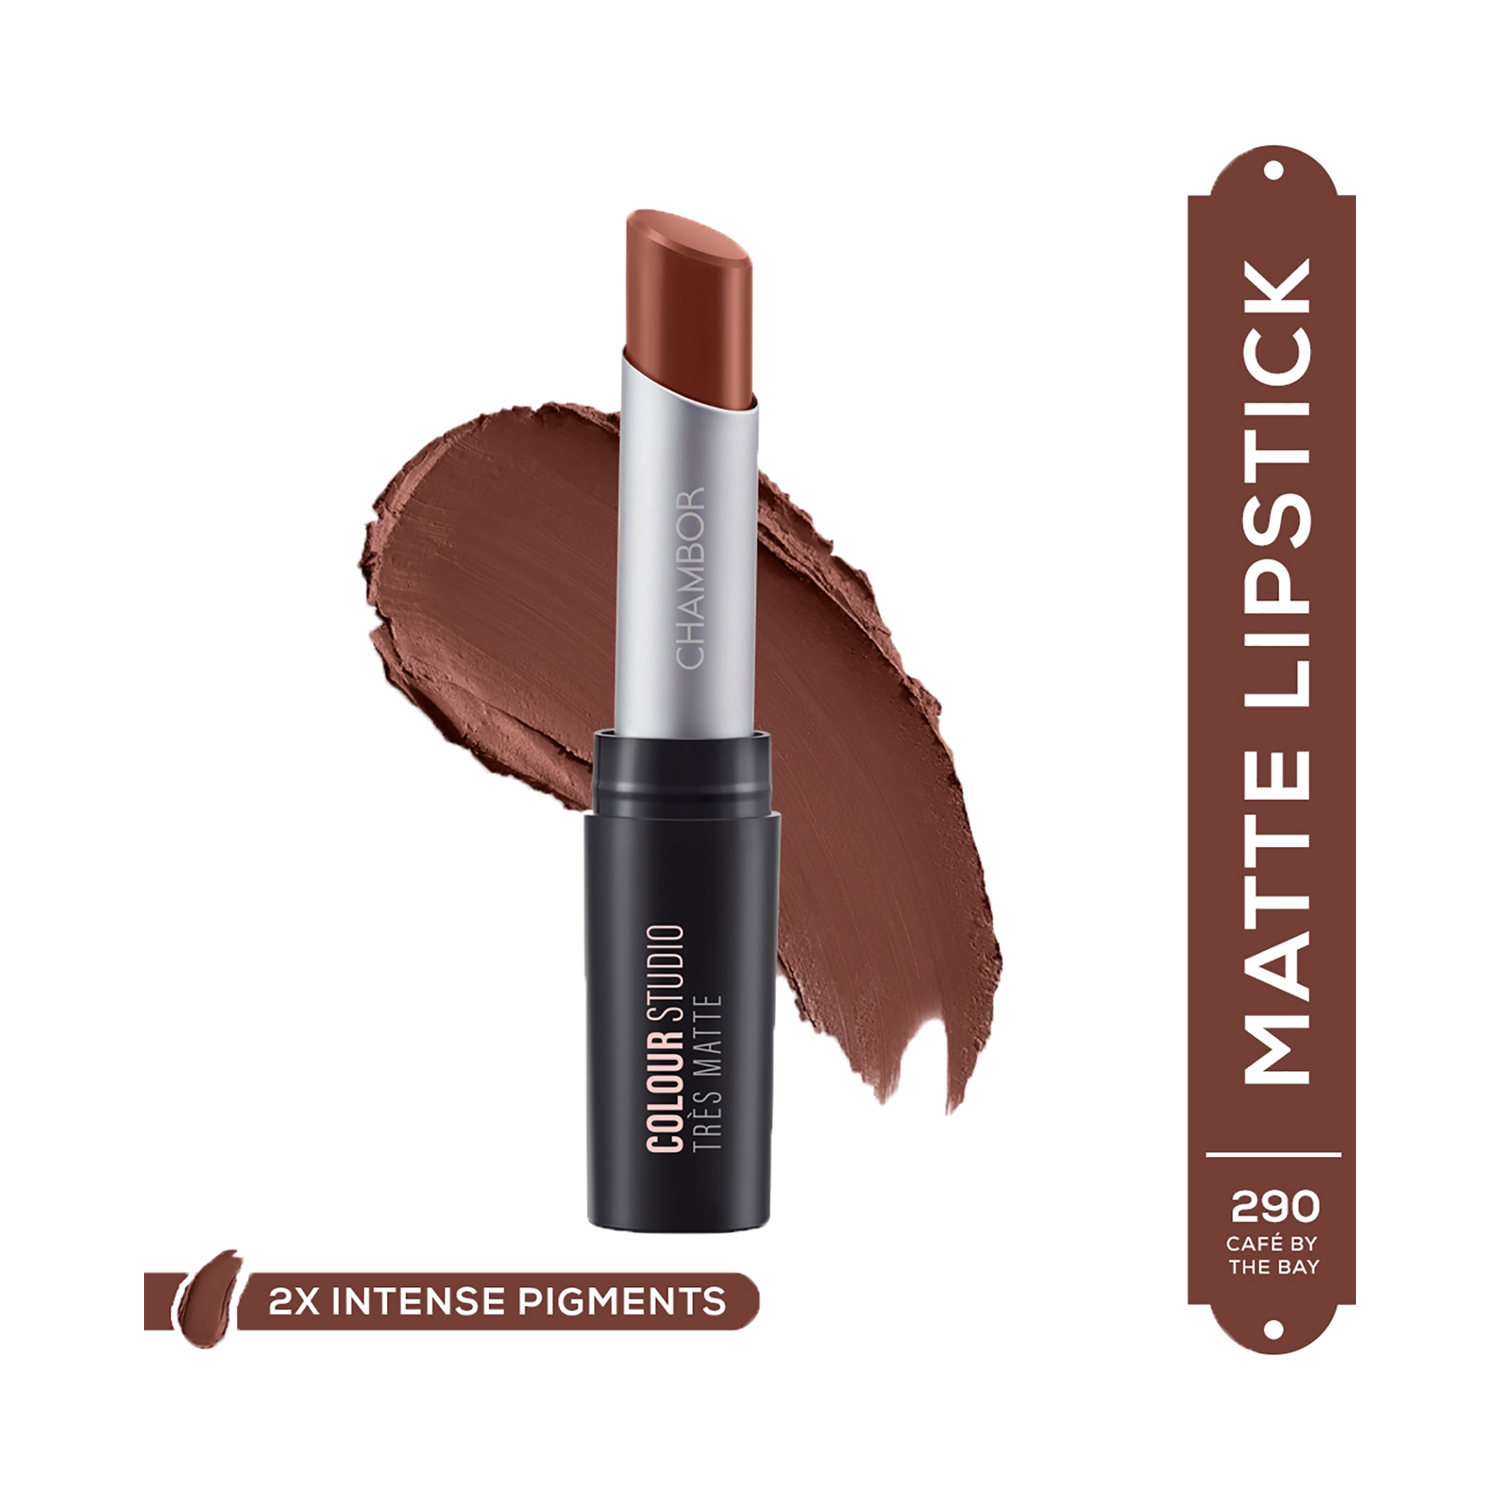 Chambor | Chambor Tres Matte Lipstick Lasting Bold Pigment with SPF 30 - N 290 Café by the Bay (3.2g)